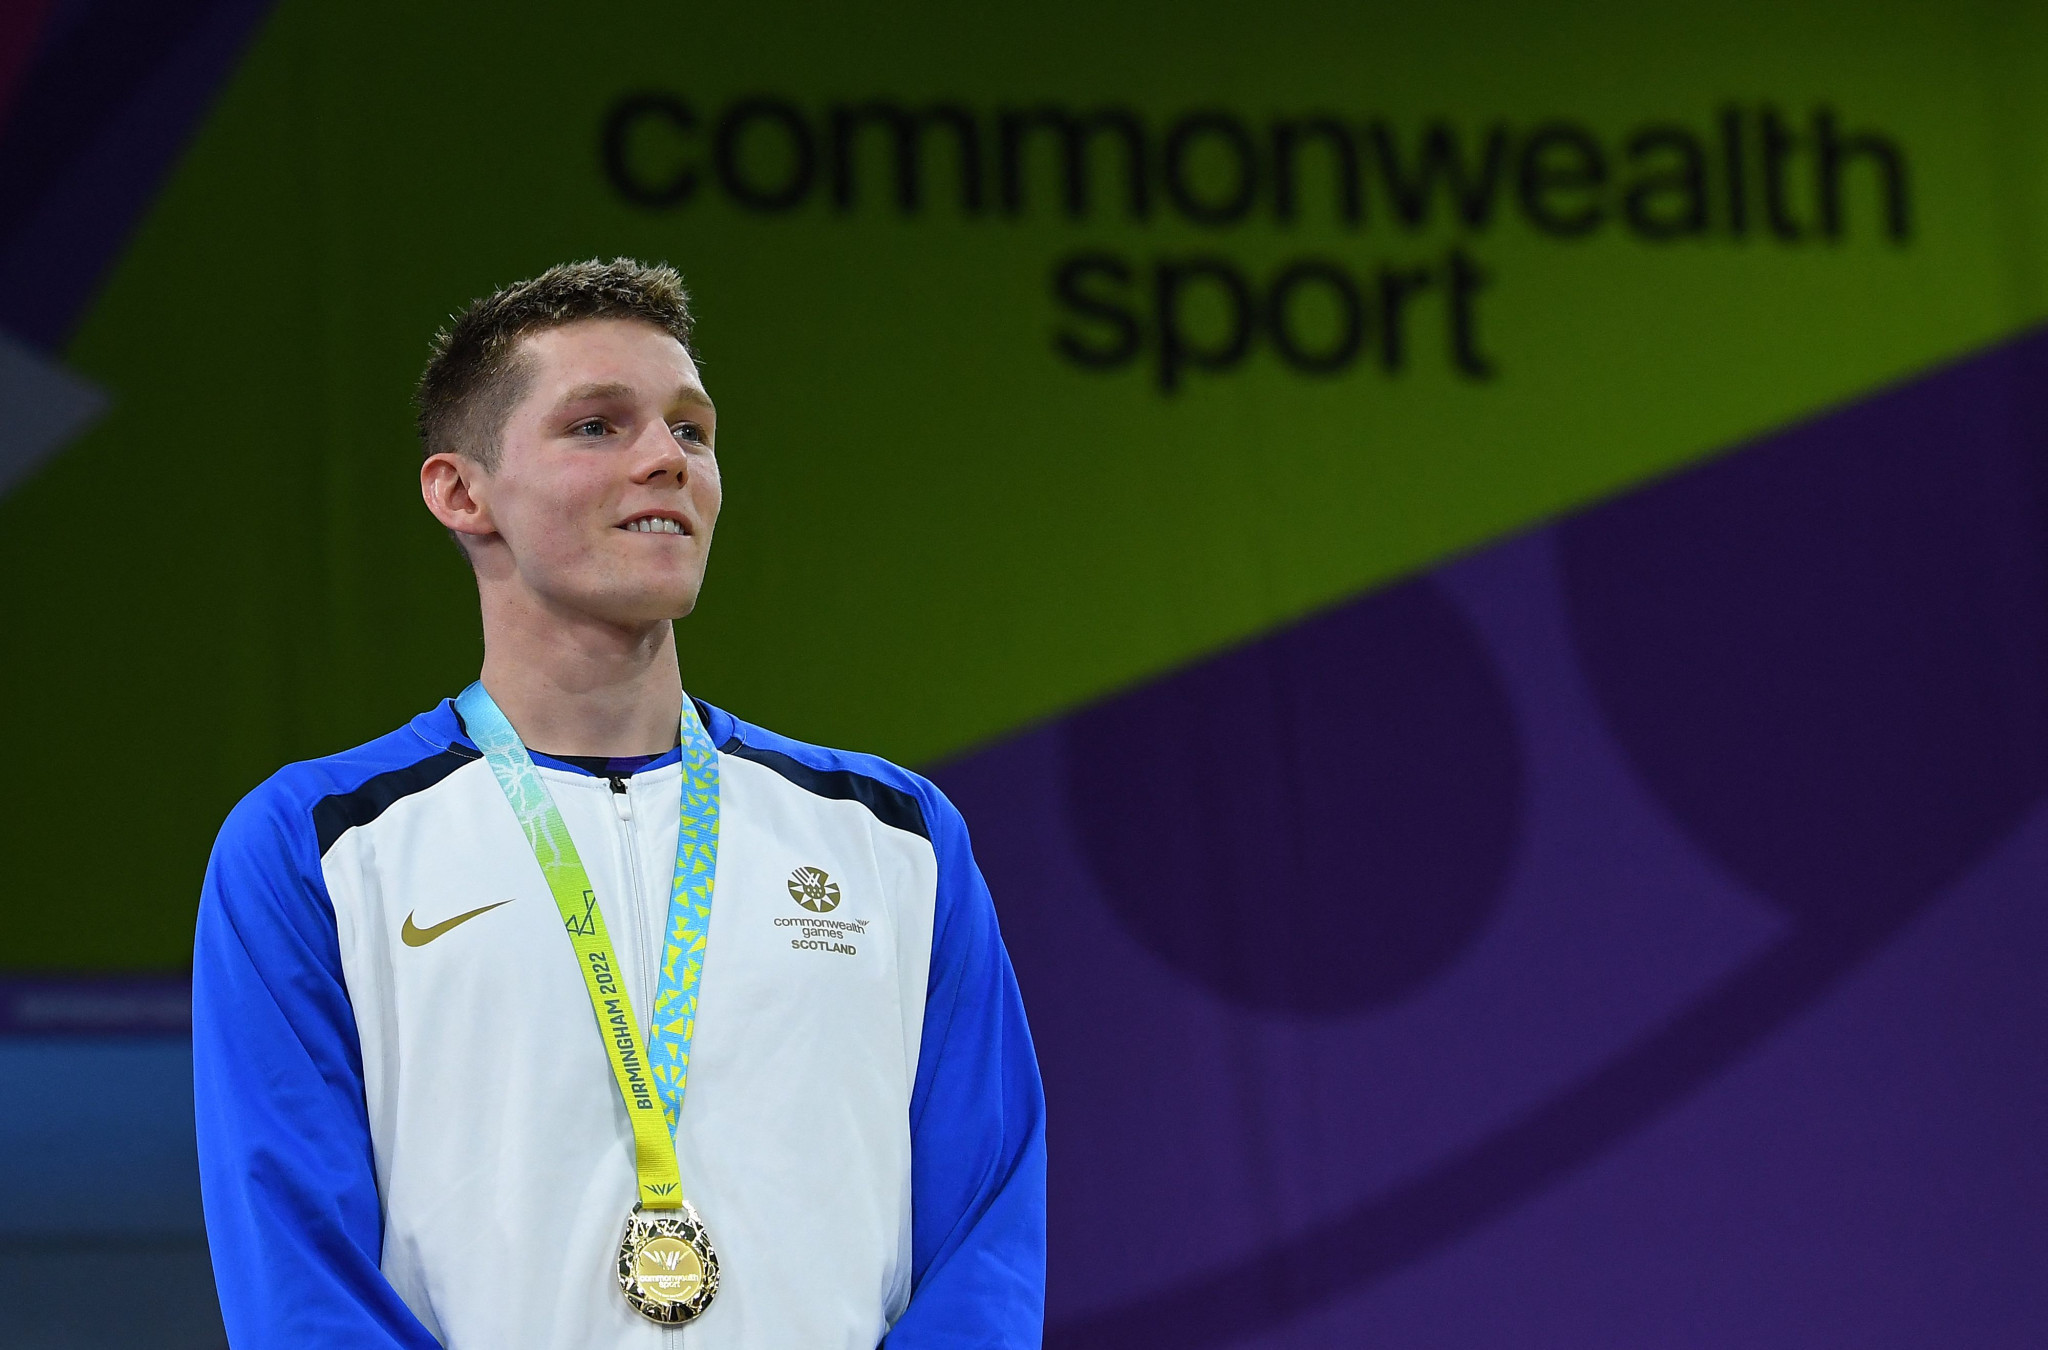 Duncan Scott won his third Commonwealth title with victory in the men's 200m individual medley ©Getty Images